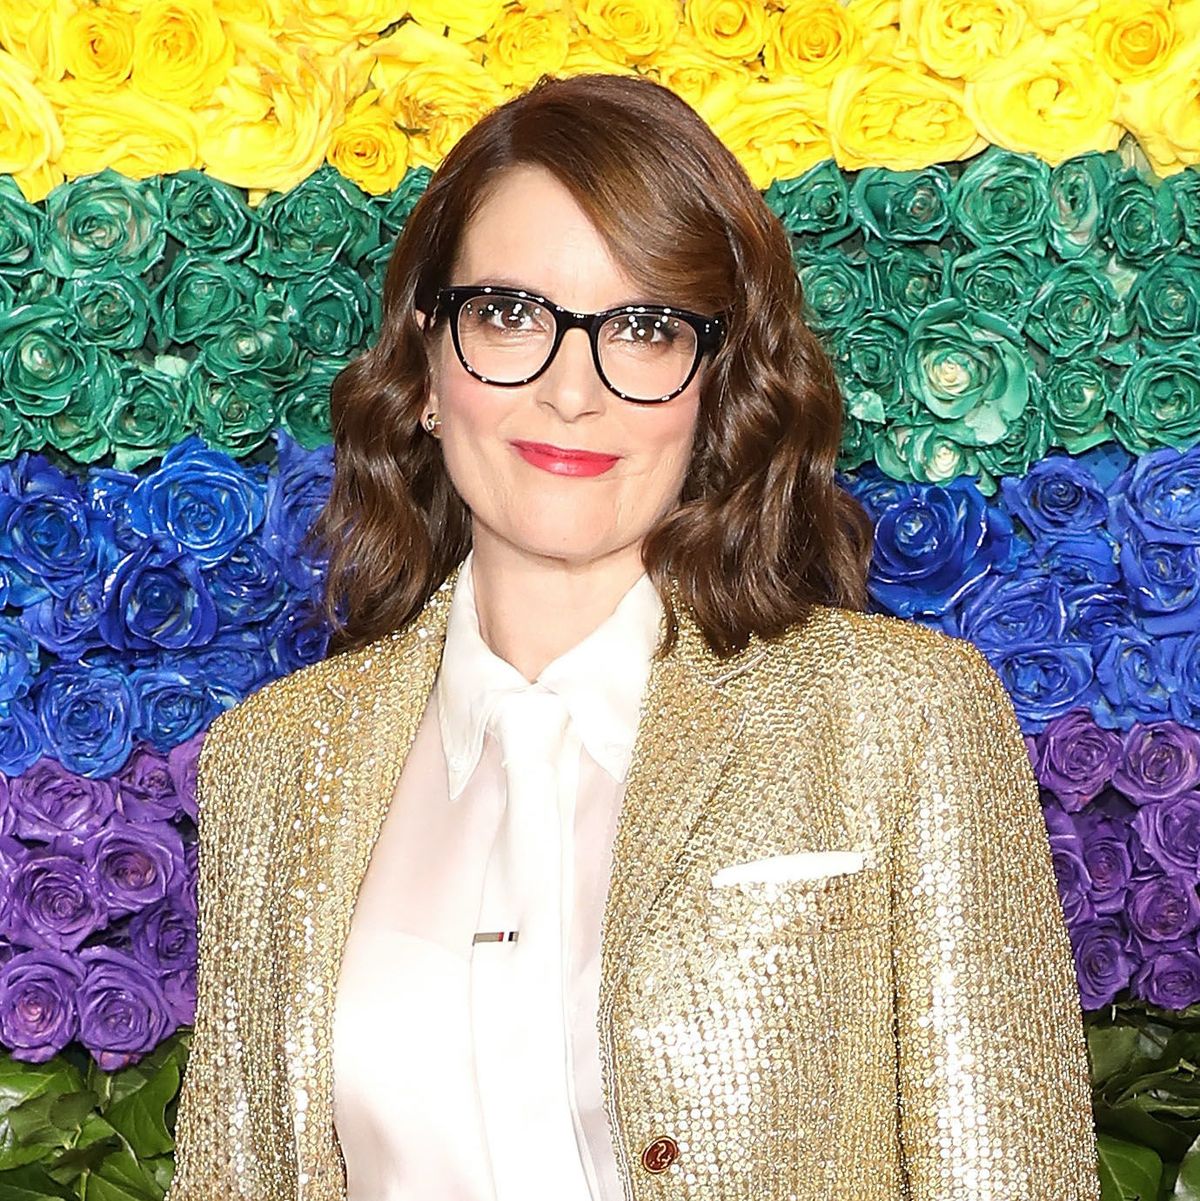 10 Things You May Not Know About Tina Fey